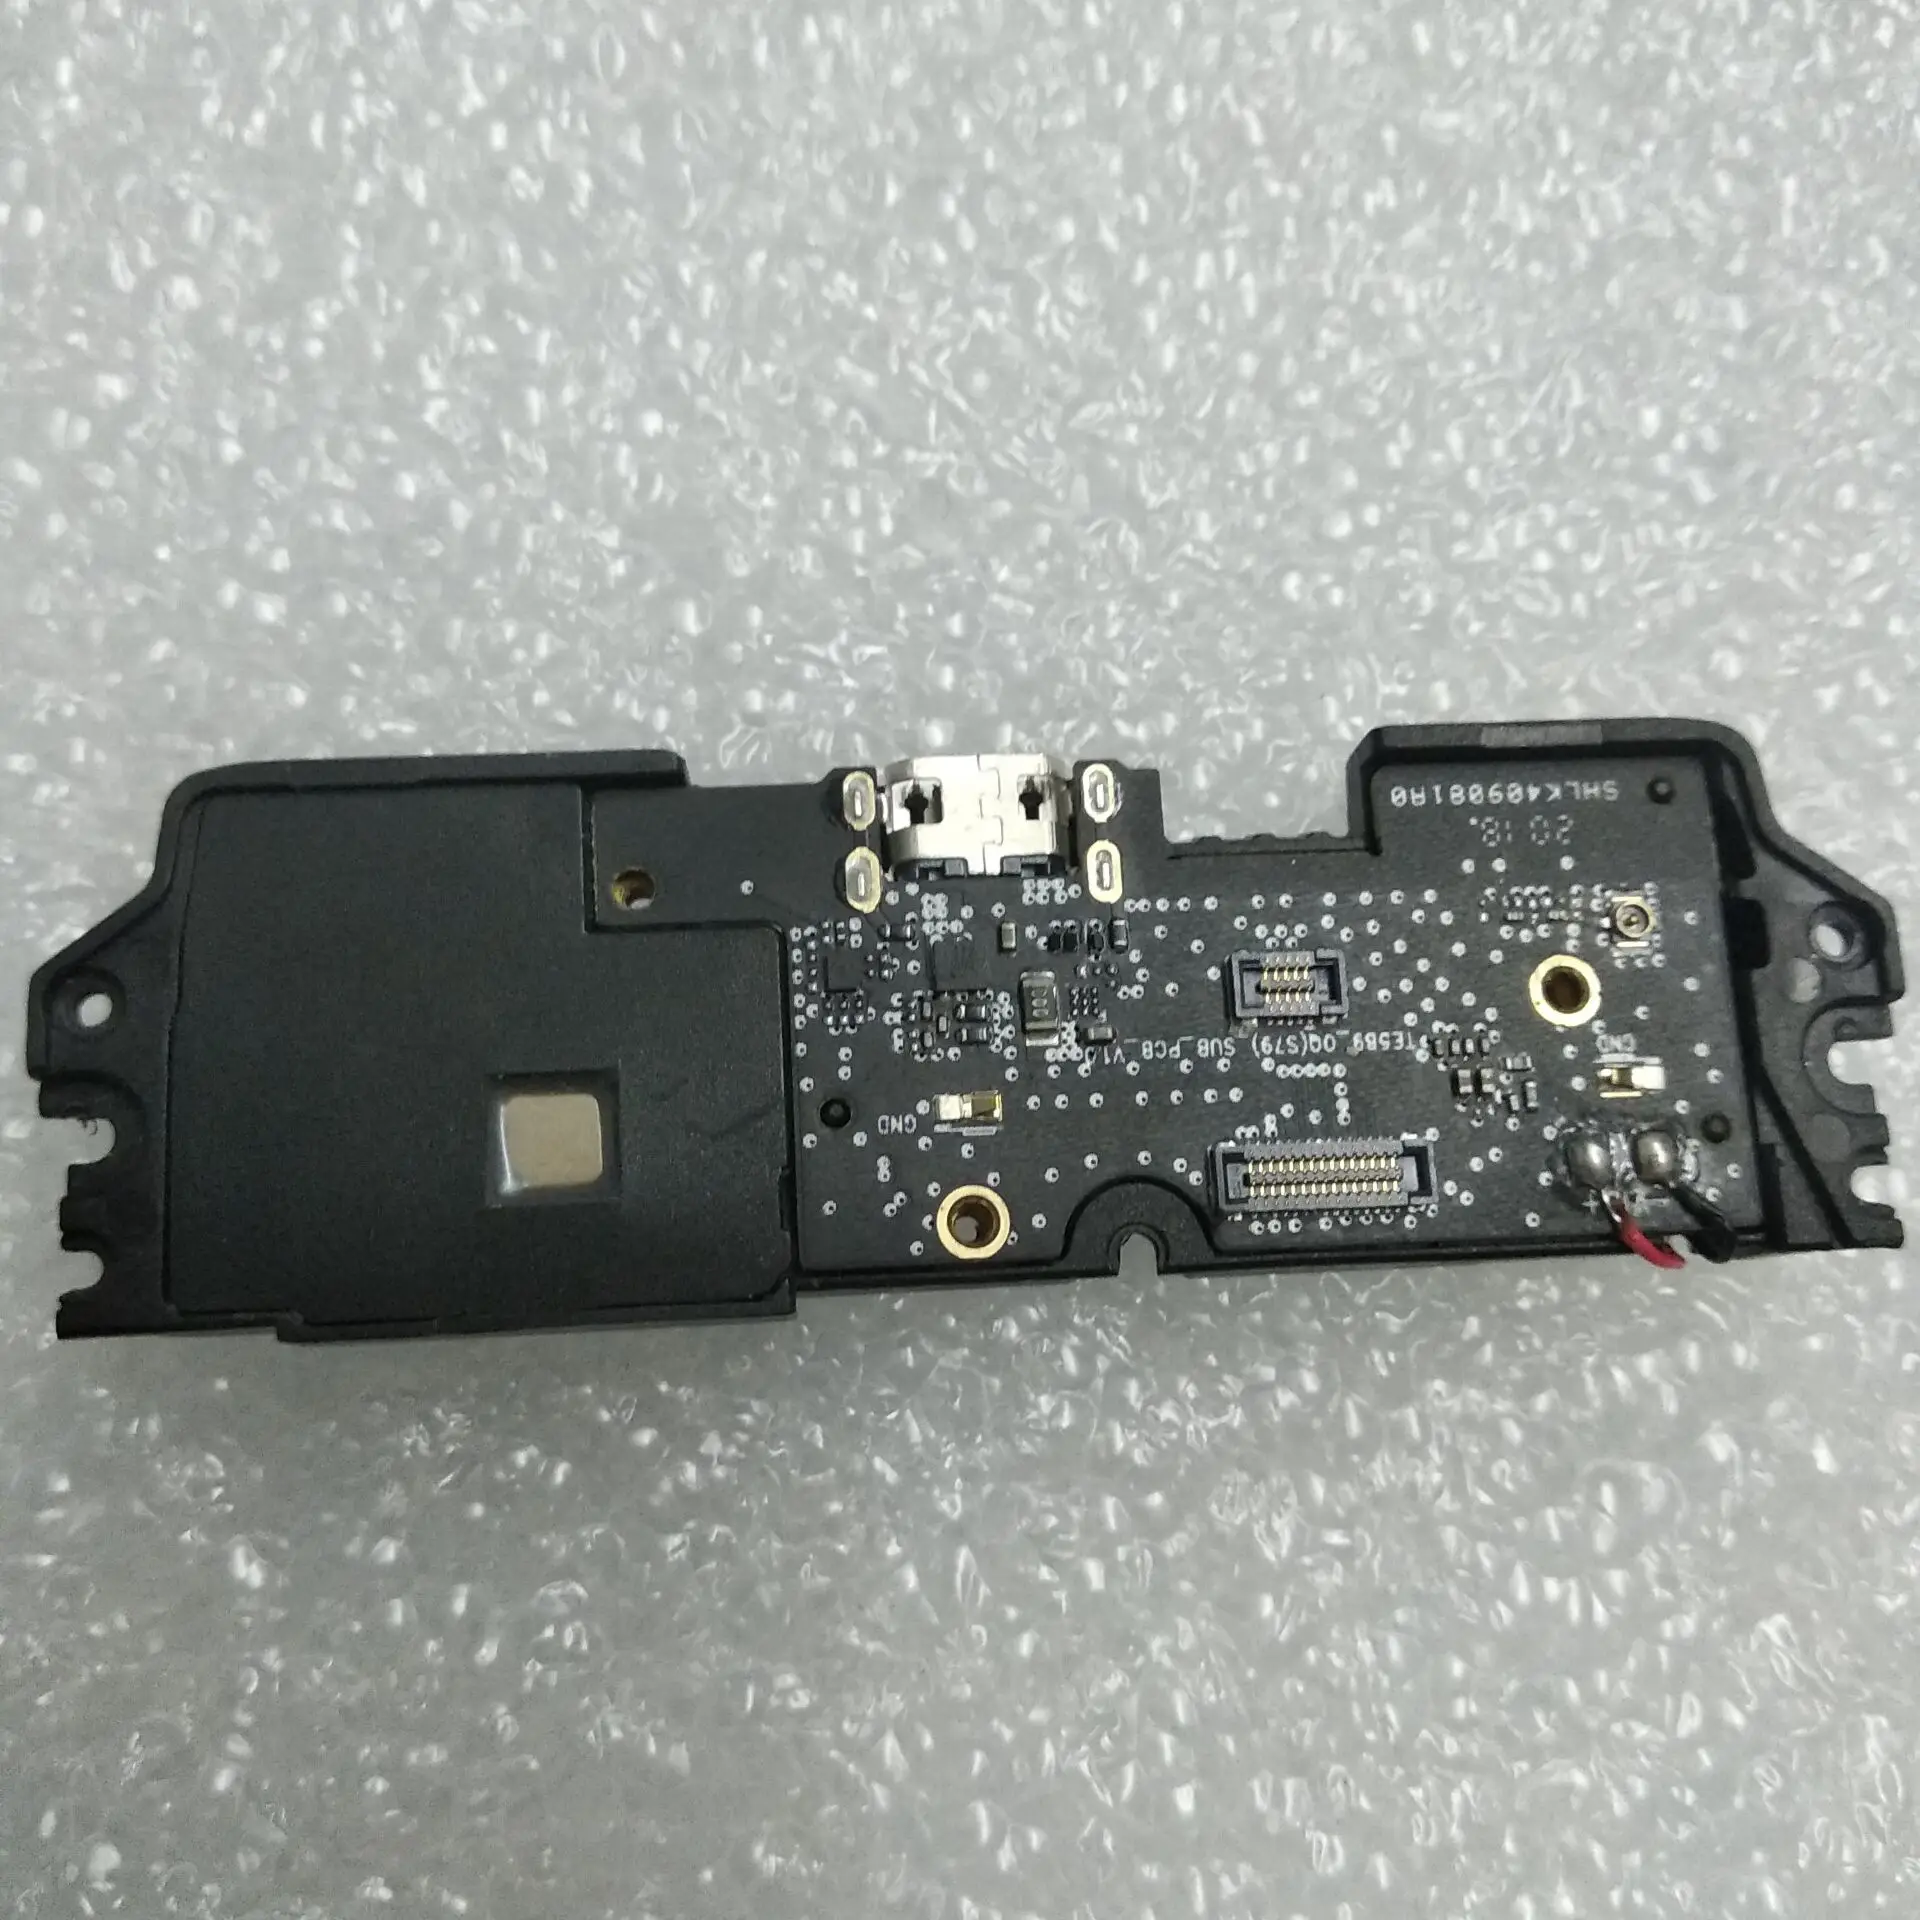 

LoudSpeaker Buzzer Ringer Horn+USB Charging Plug USB Slot Charger Port Connector Board Parts Micro Accessories OUKITEL WP8 Pro